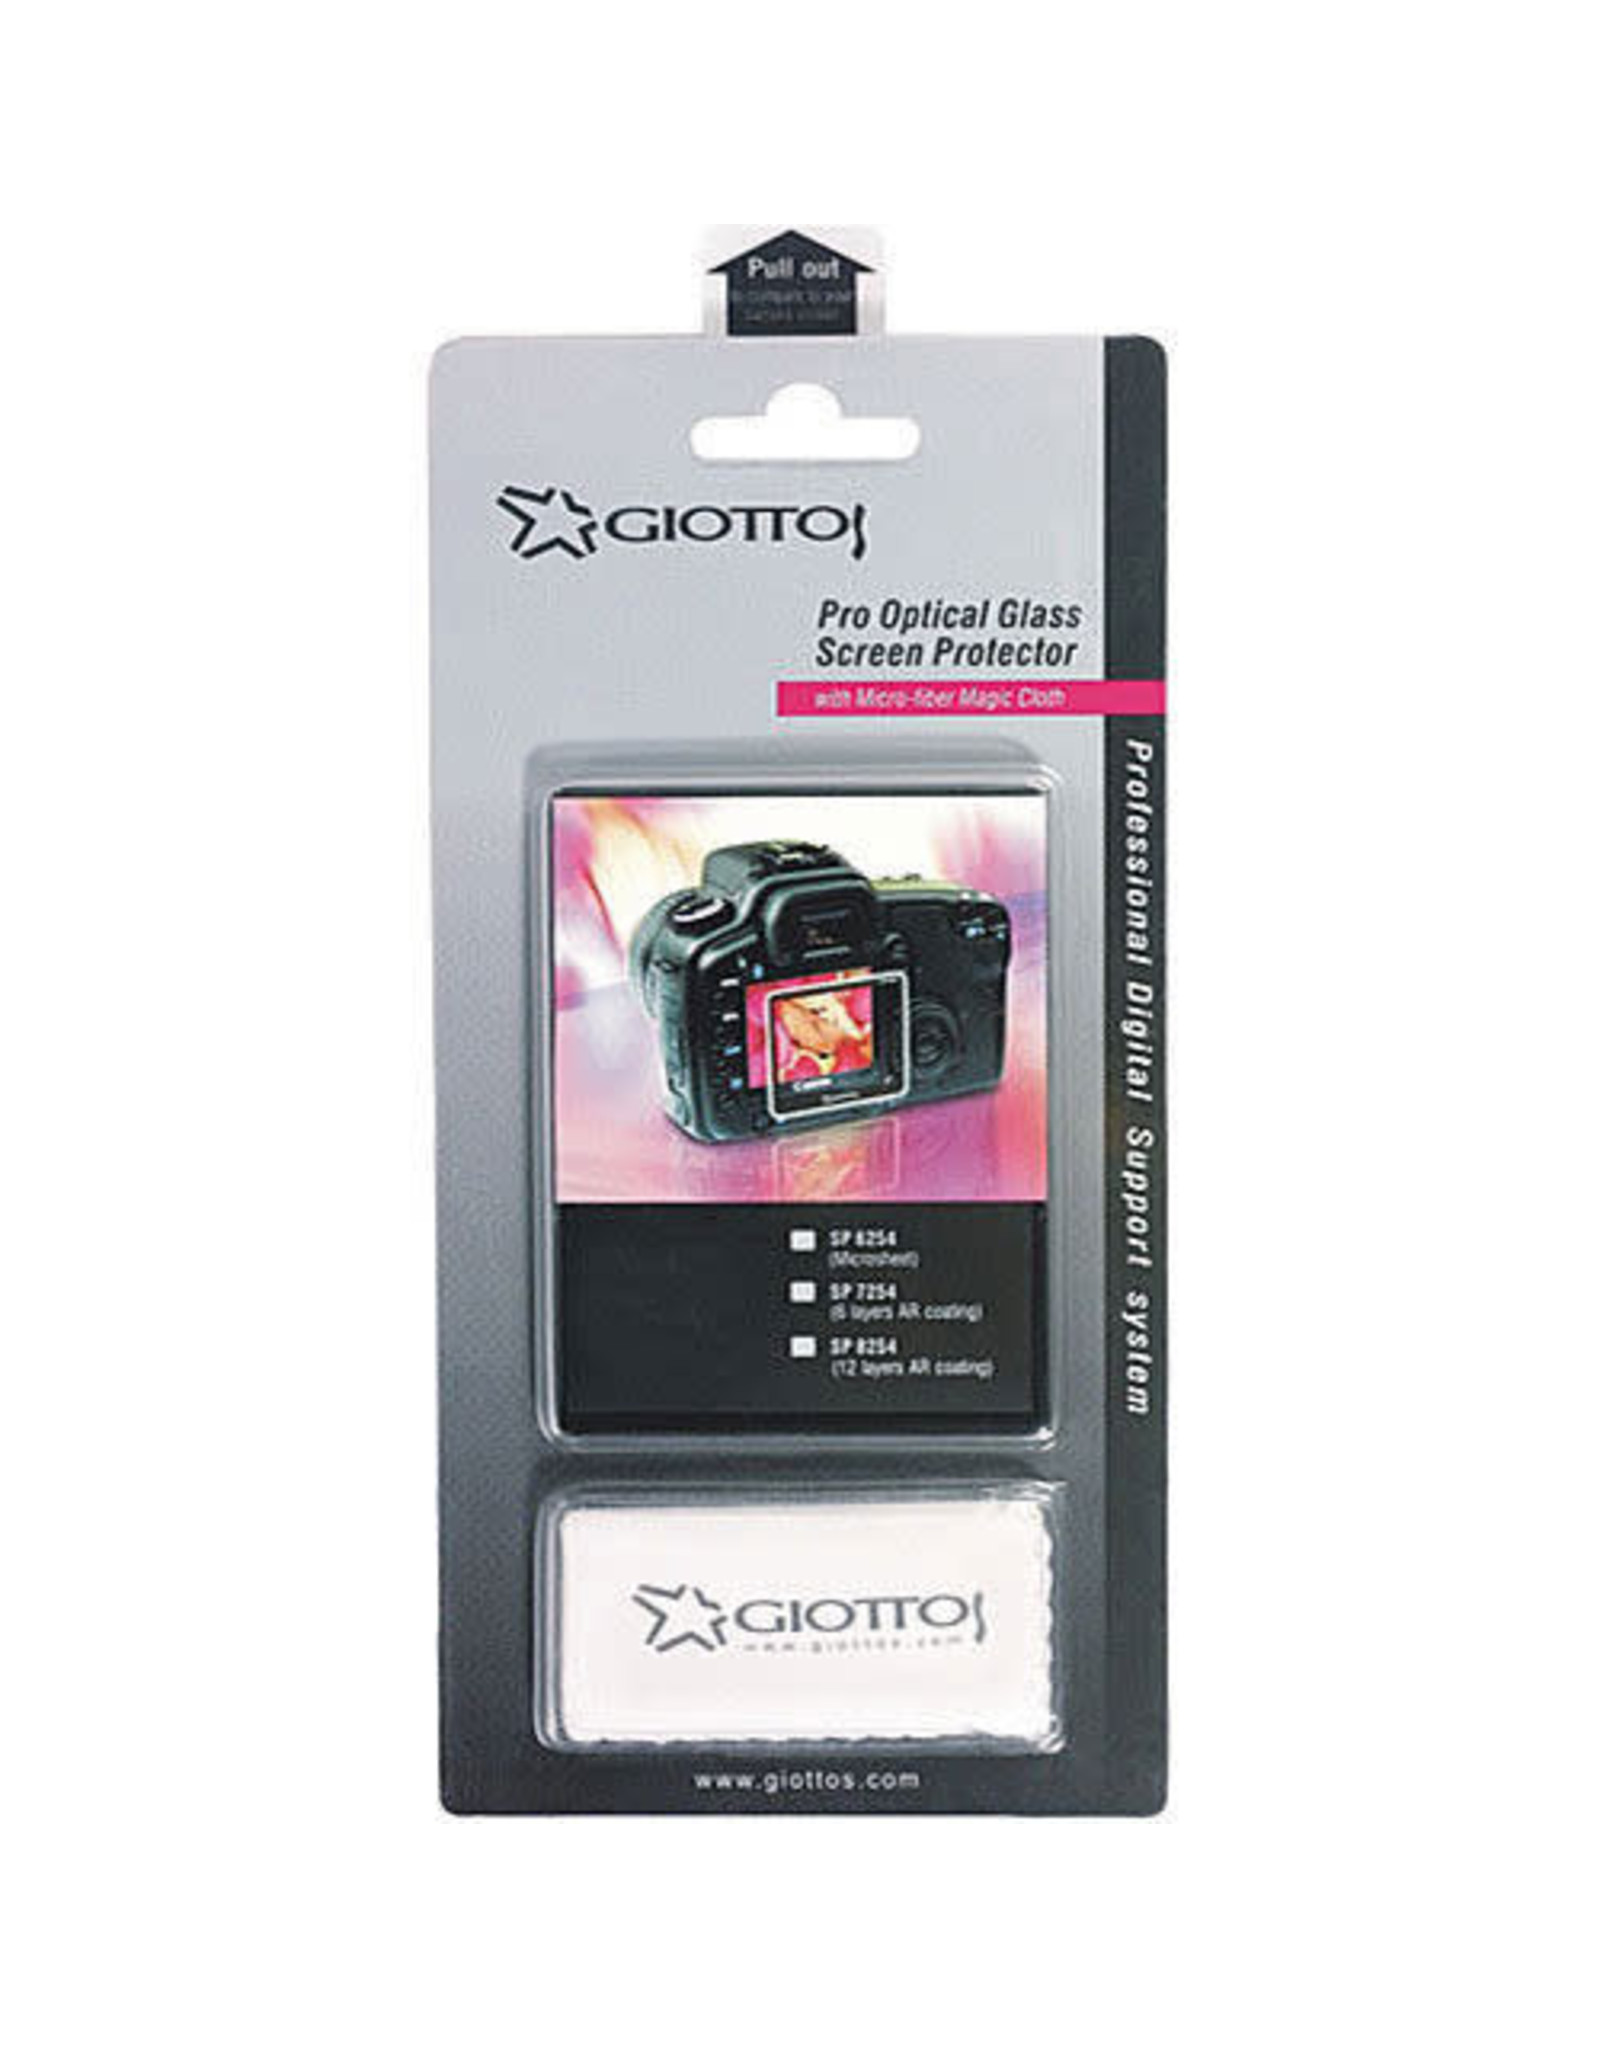 Giottos Aegis Professional M-C Schott Glass Screen Protector for Canon XTI/400D